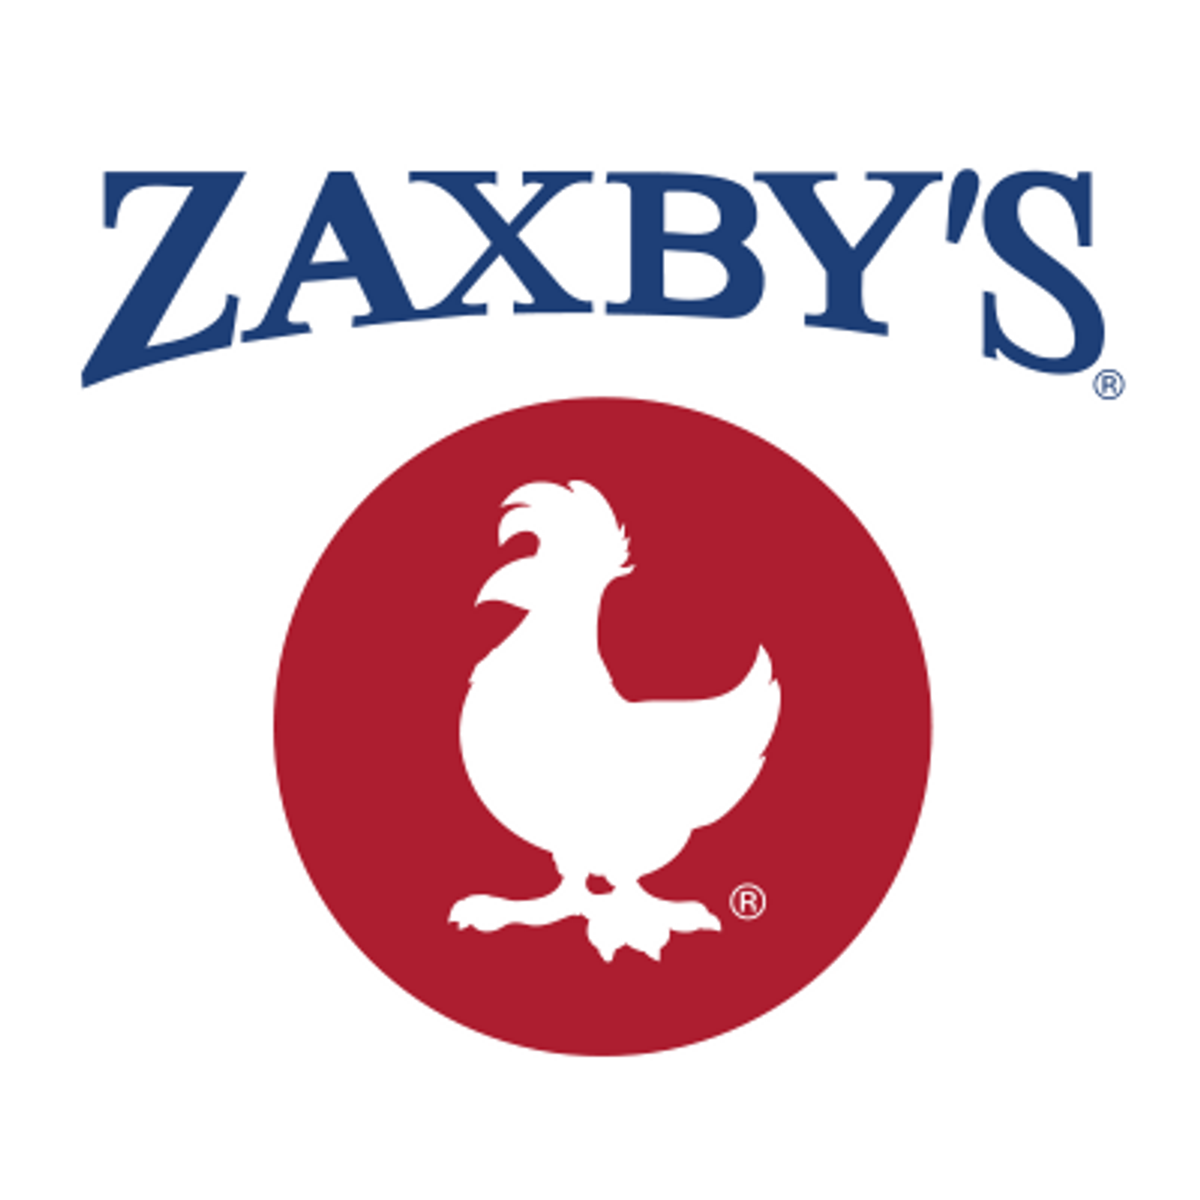 The Ultimate Ranking Of Zaxby's Menu